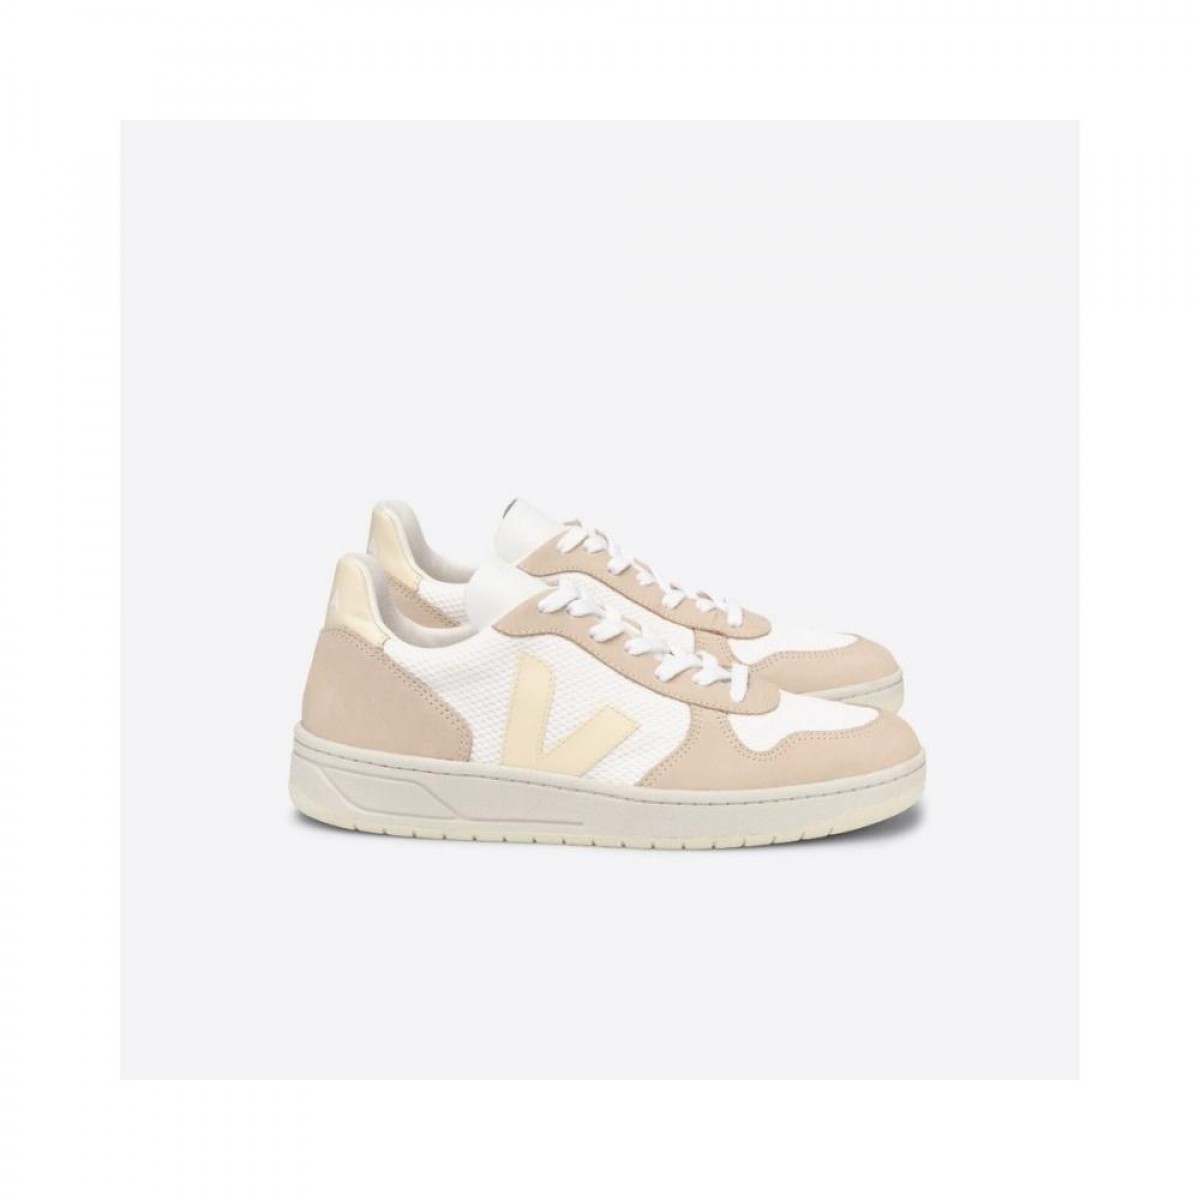 v-10 sneakers - white butter almond - front